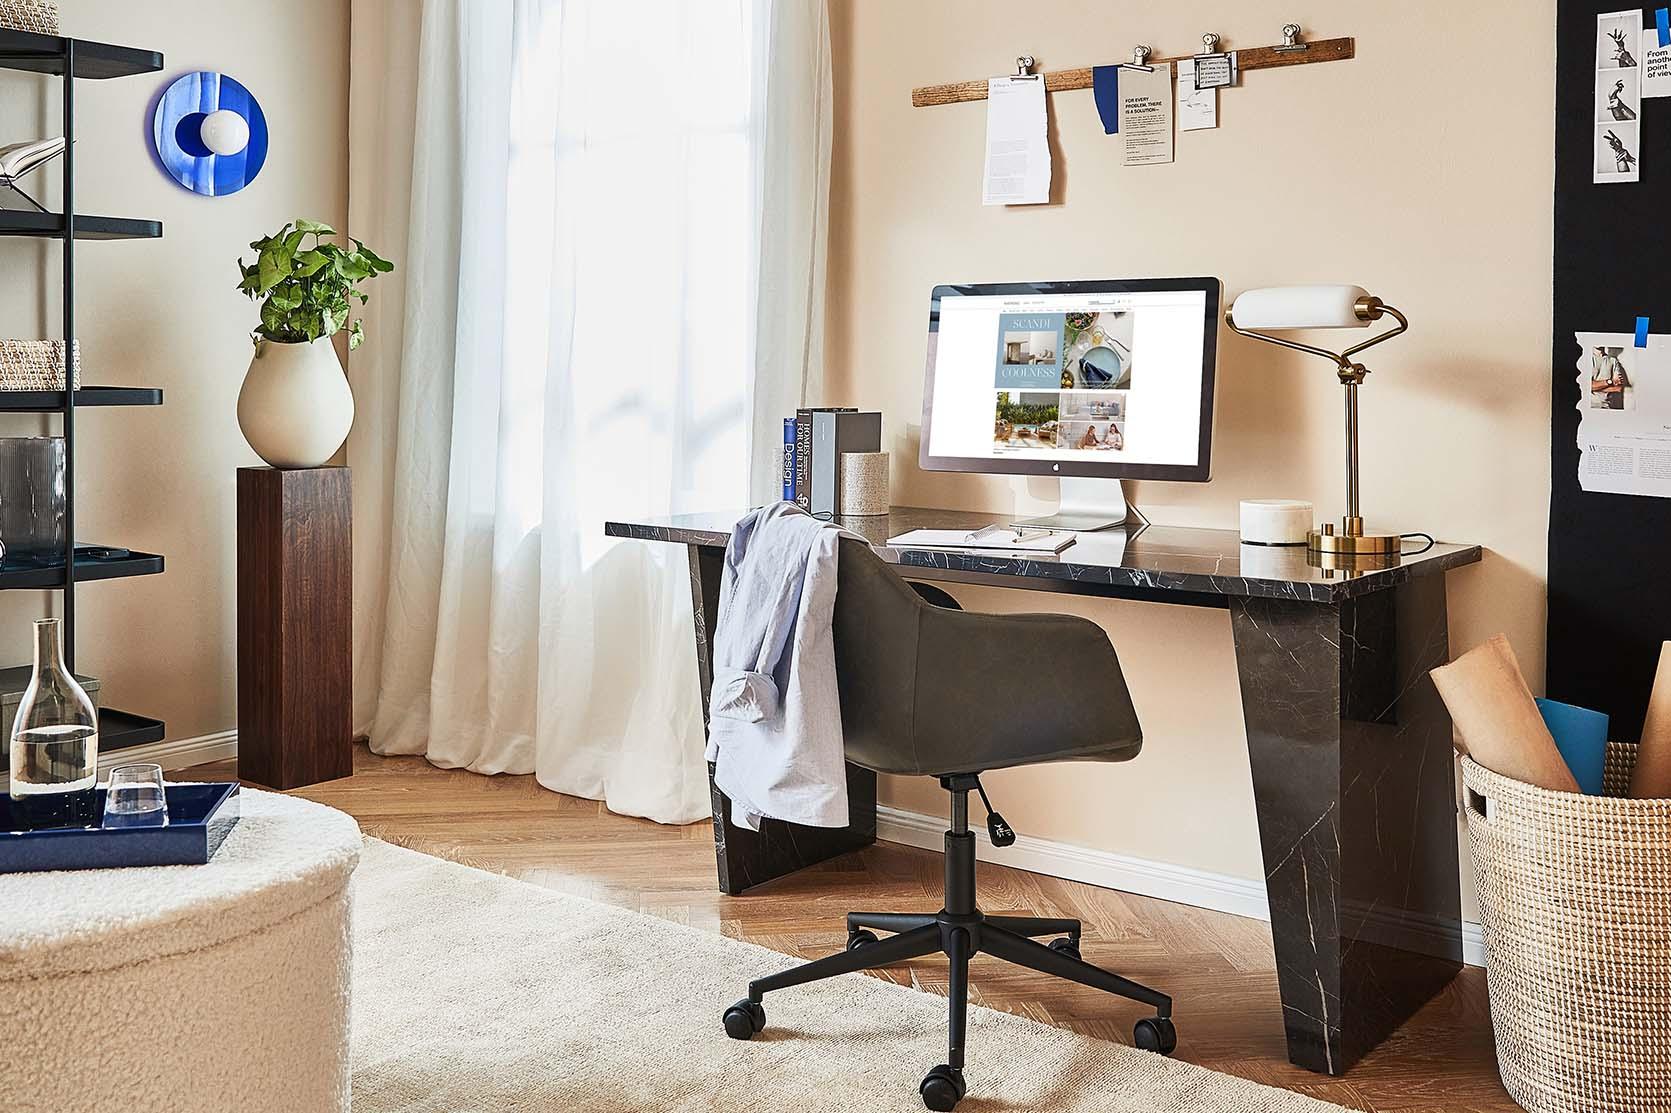 Tendenze nell’home office 